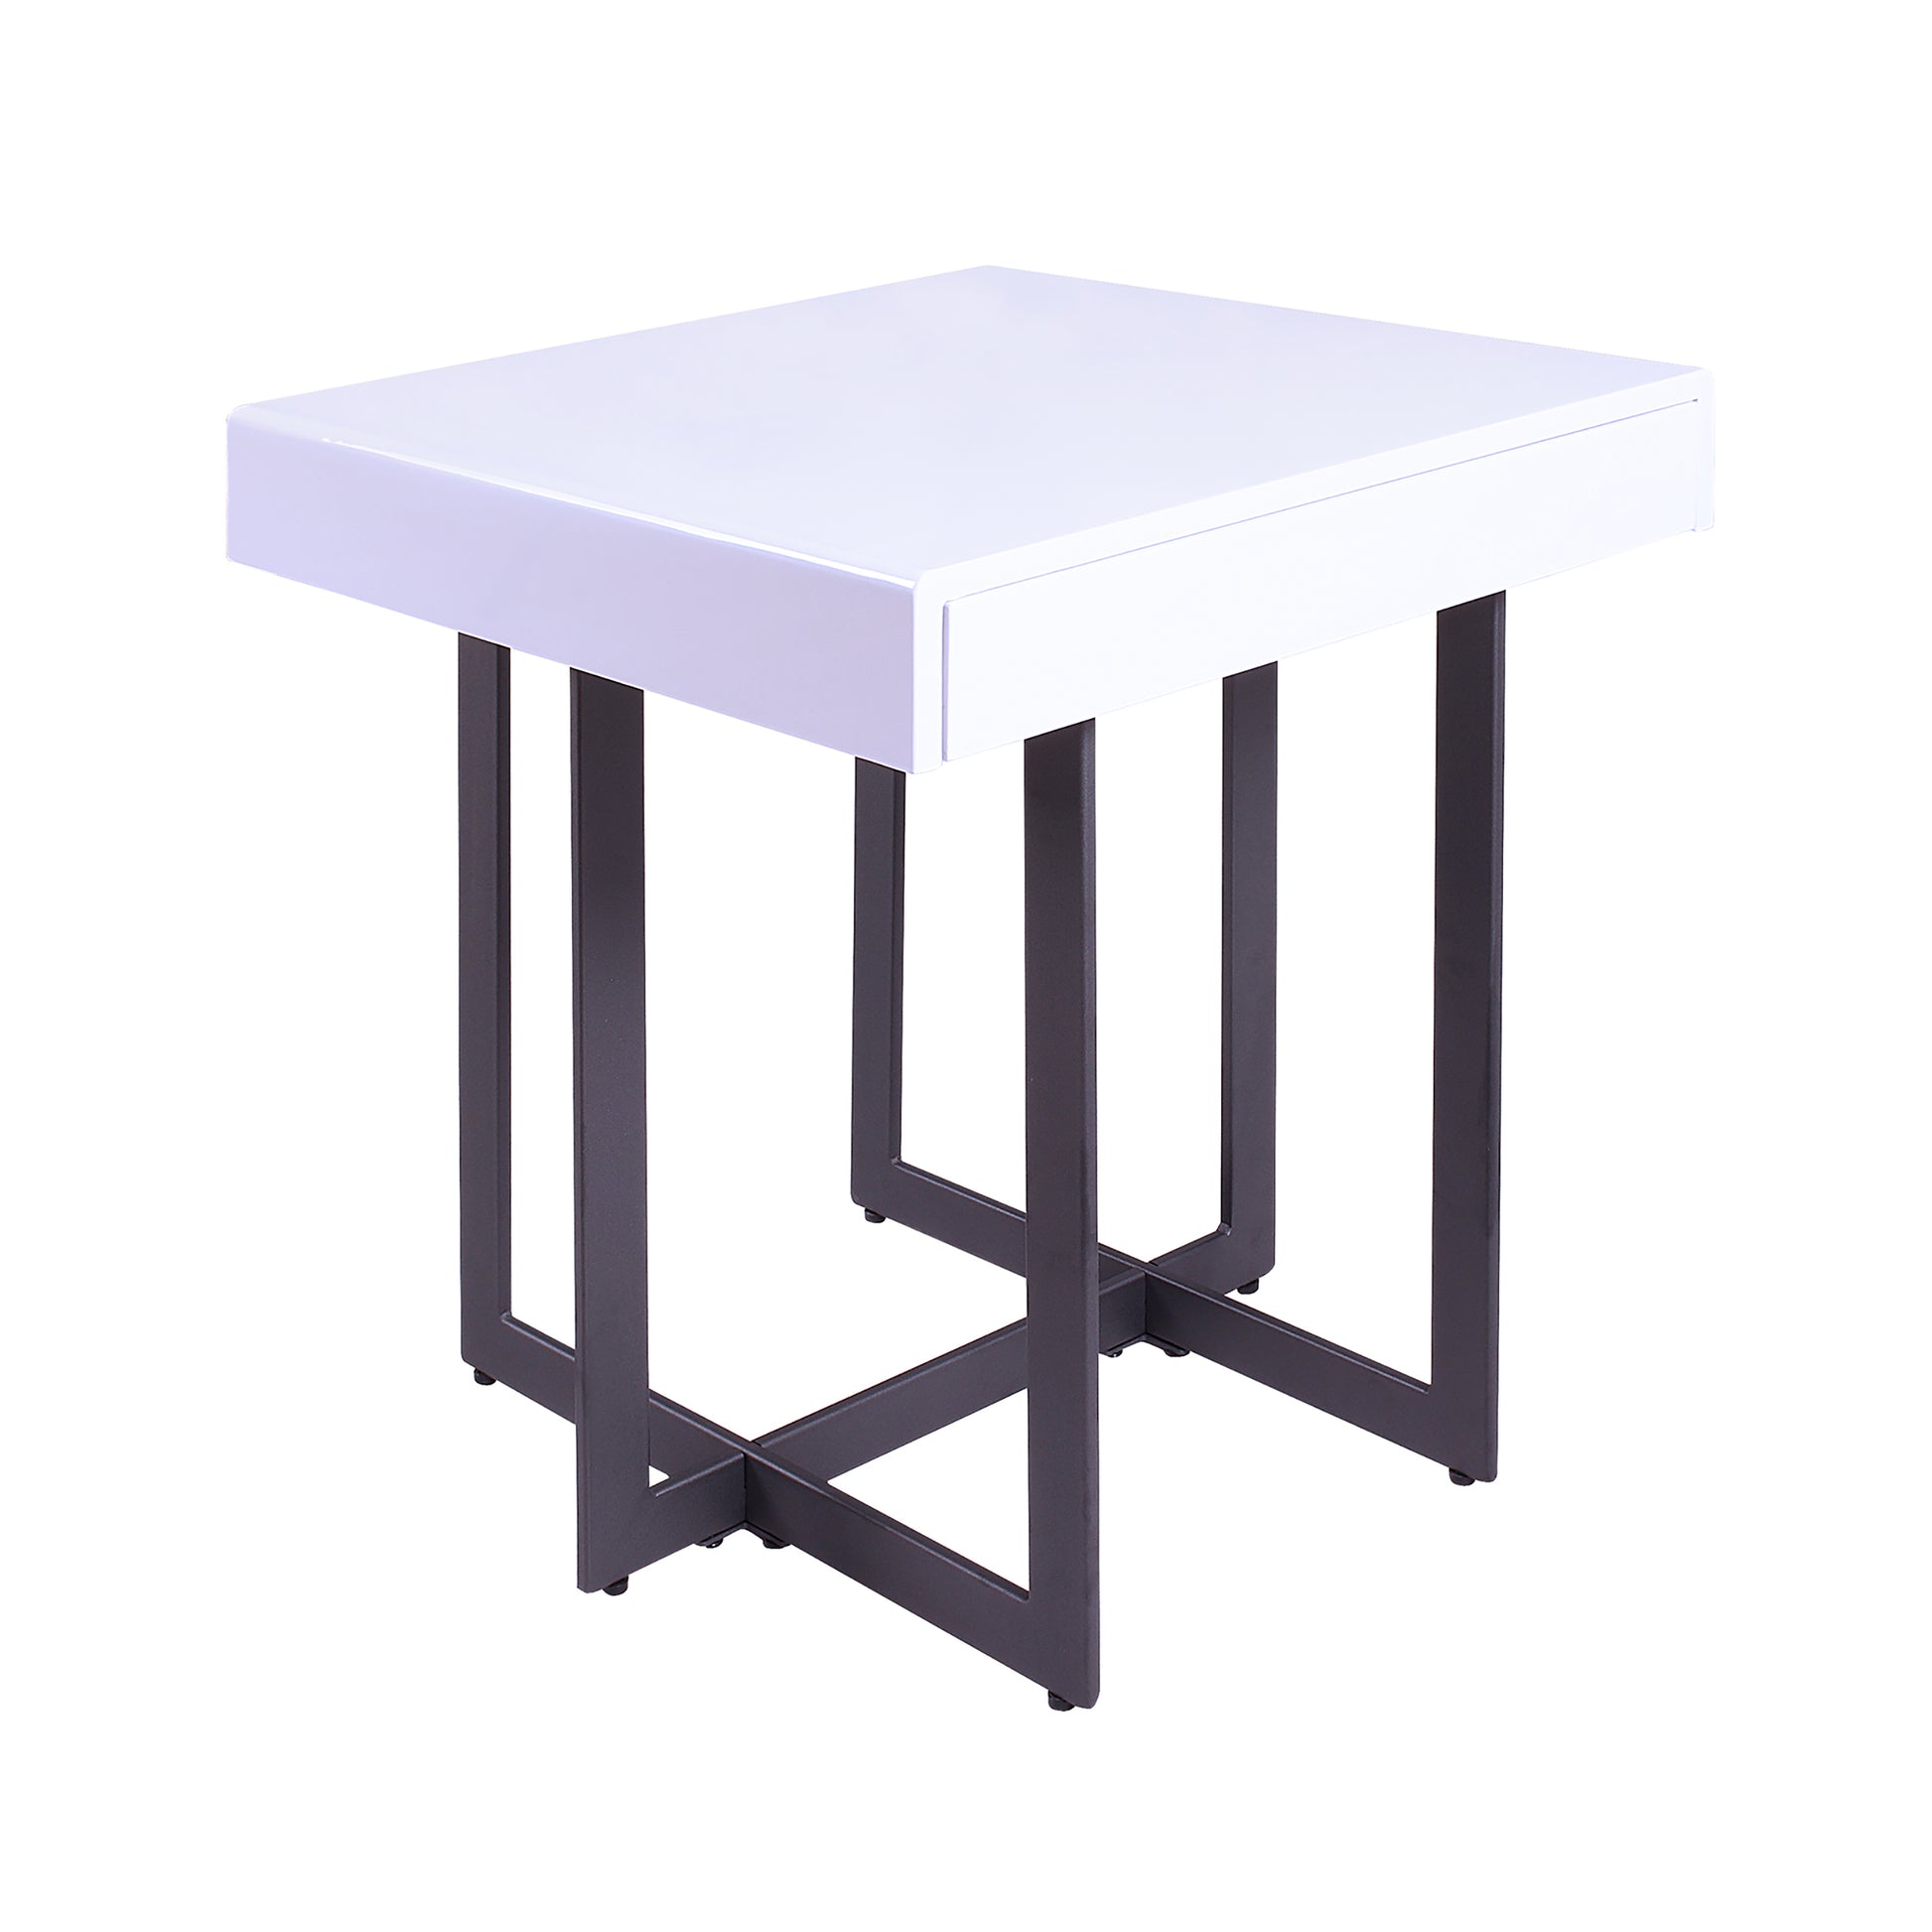 Right angled end table only from a two-piece modern white high gloss and gunmetal storage coffee table set with hidden drawers on a white background